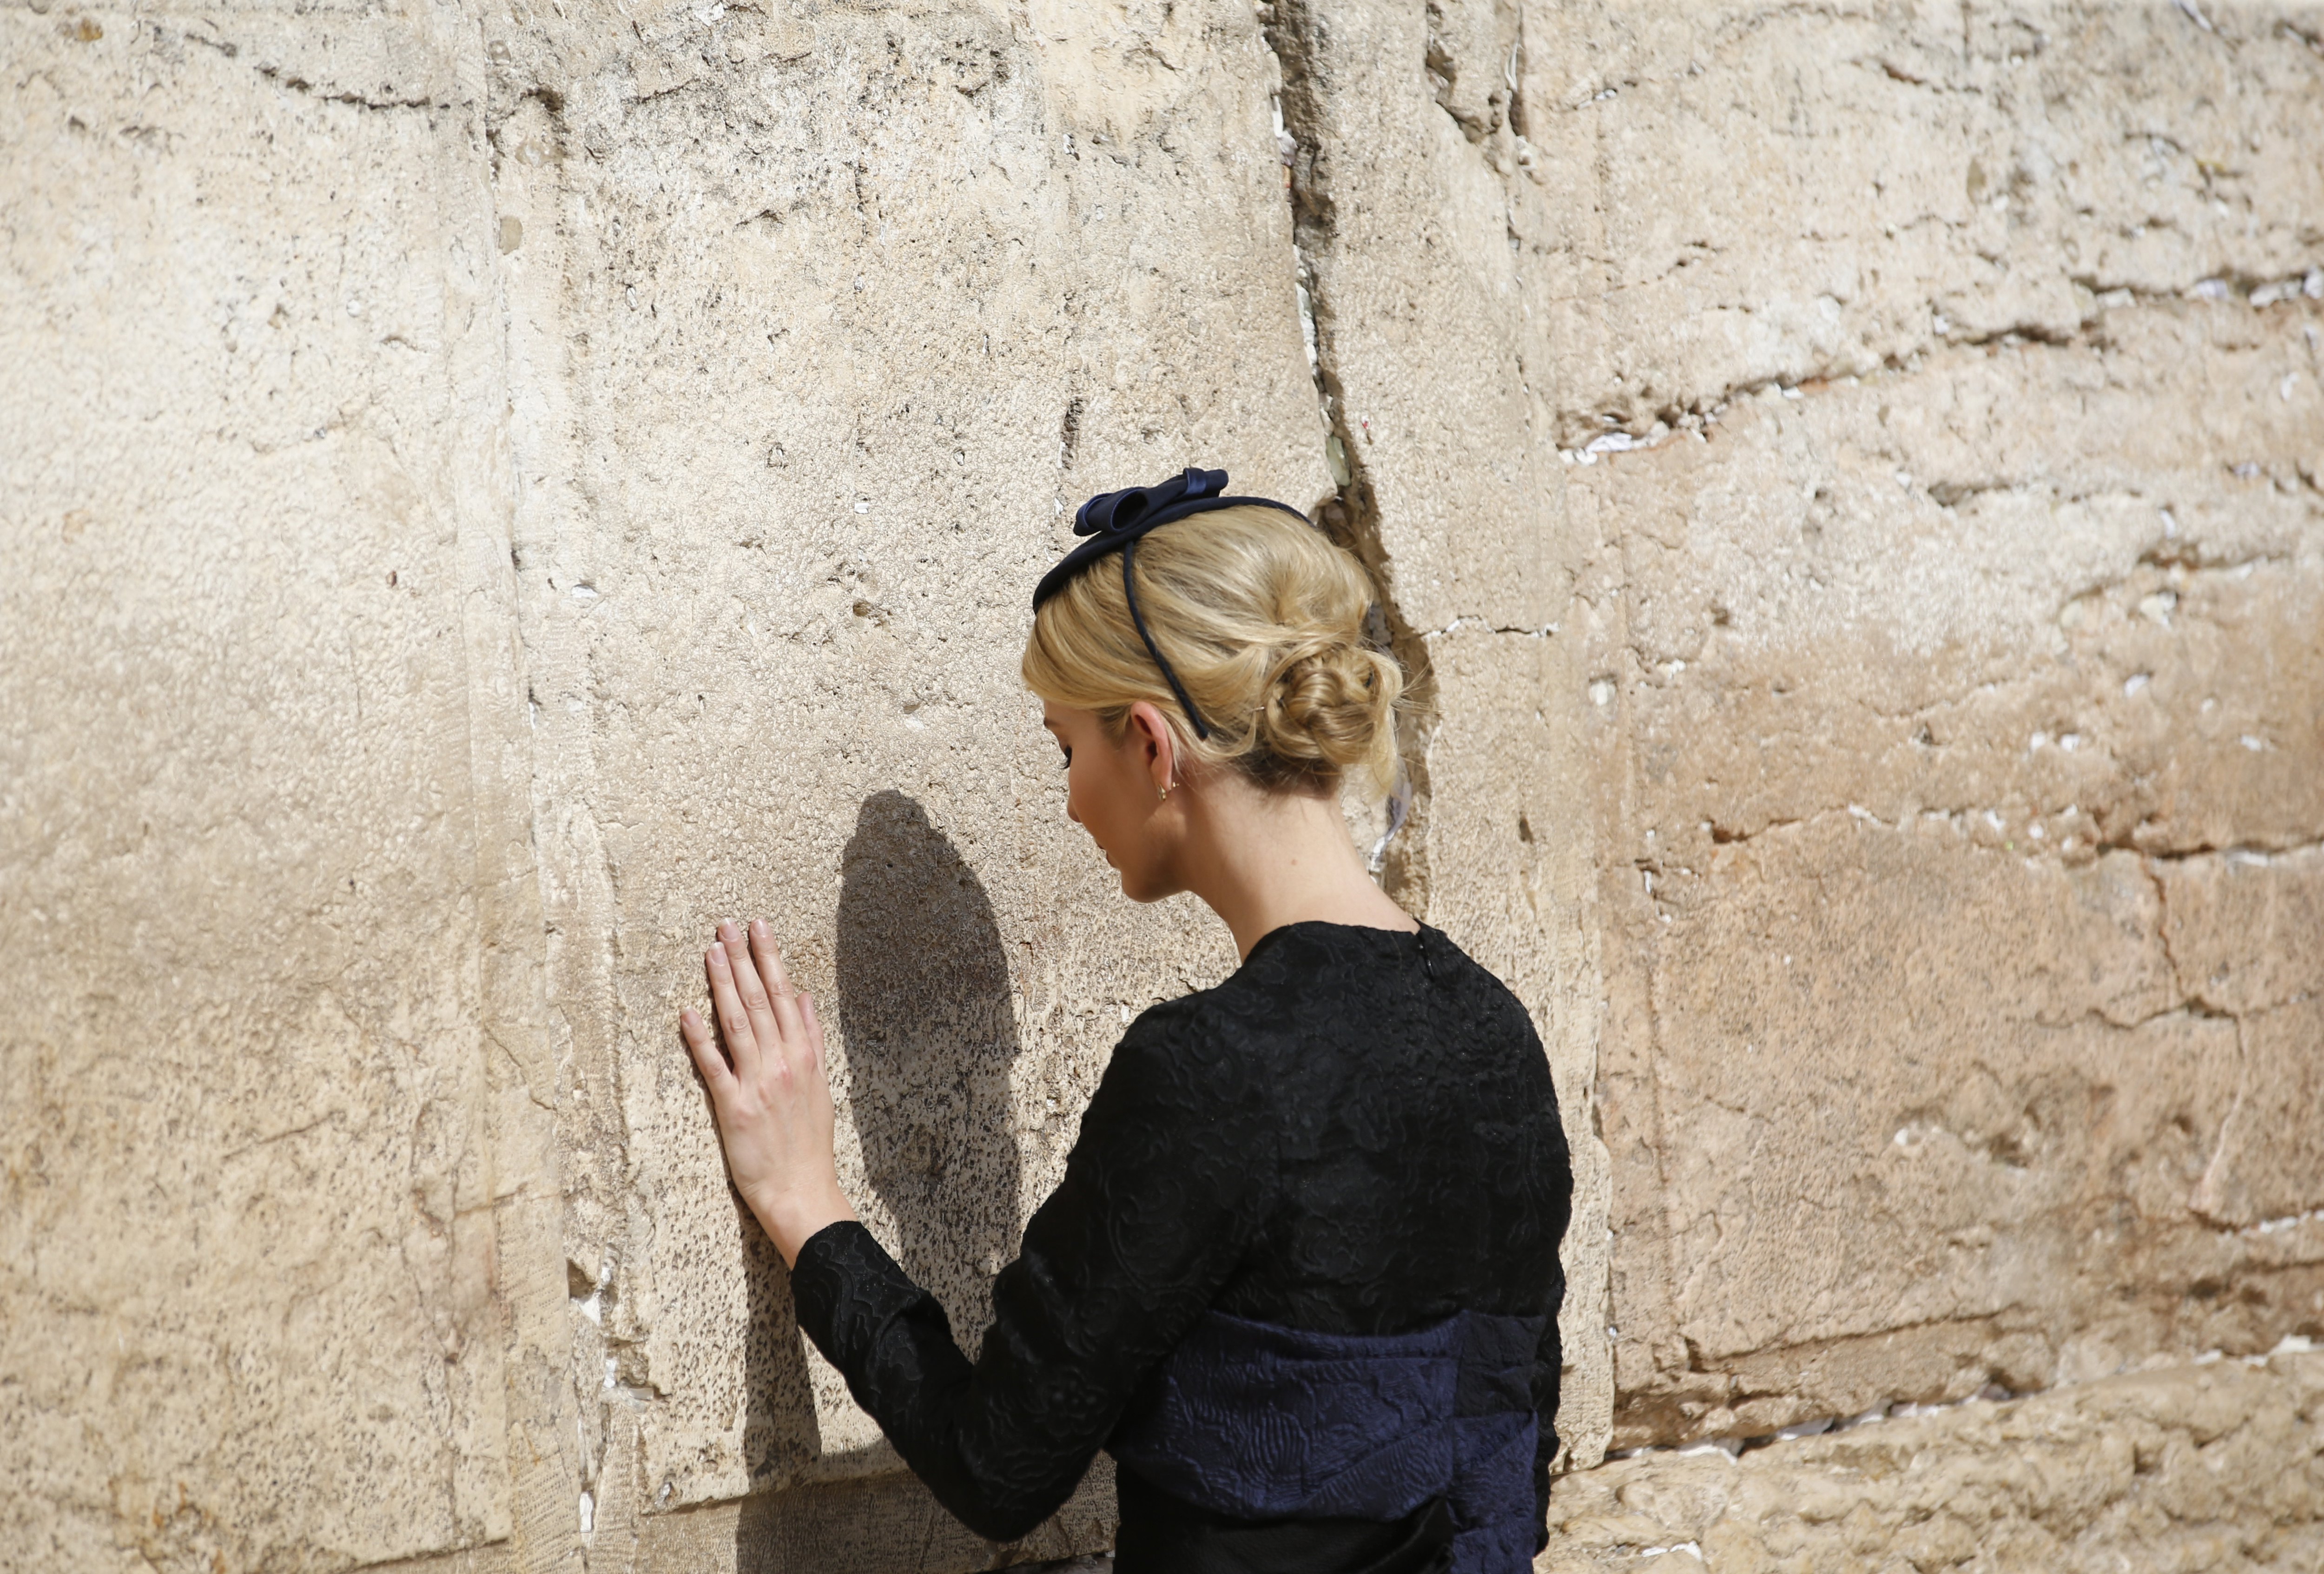 2017-05-22 15:06:17 epa05981666 Ivanka Trump, assistant and daughter of US President Donald J. Trump, touches the Western Wall, Judaism's holiest prayer site, in Jerusalem's Old City, 22 May 2017. President Trump and his contingent arrived for a 28-hour visit to Israel and the Palestinian Authority areas on his first foreign trip since taking office in January. EPA/RONEN ZVULUN / POOL